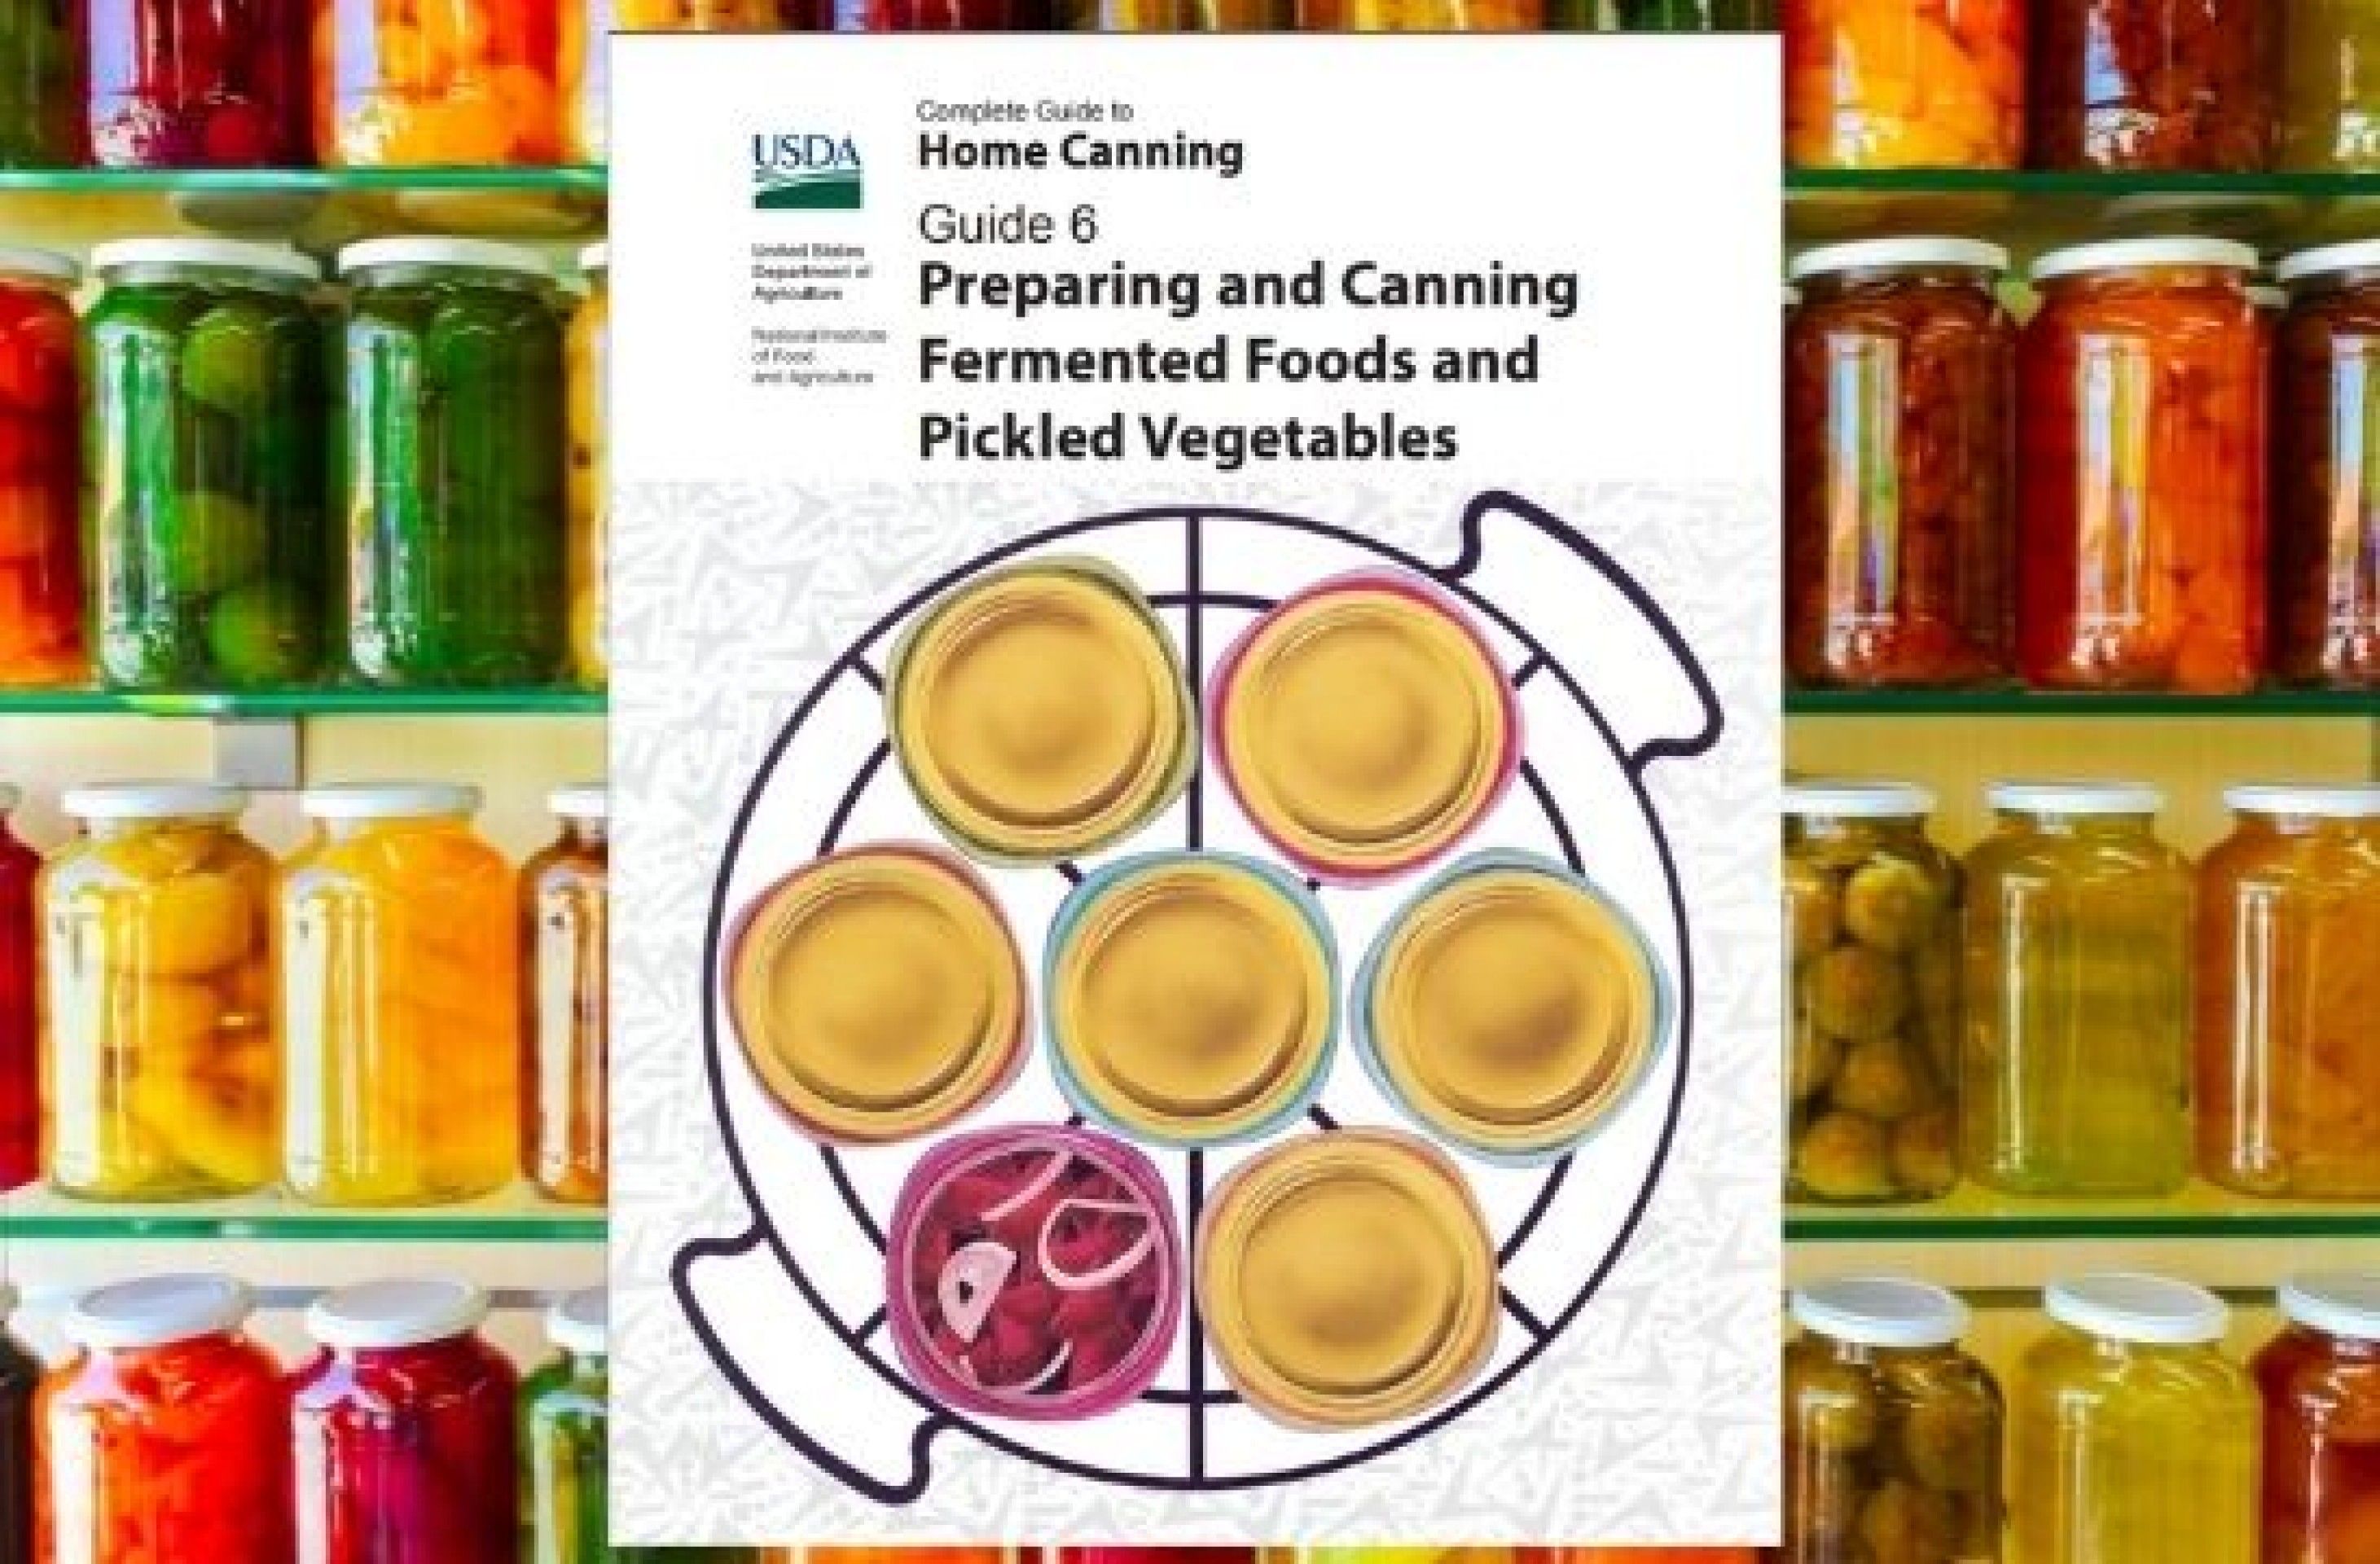 Home Canning Guide 6